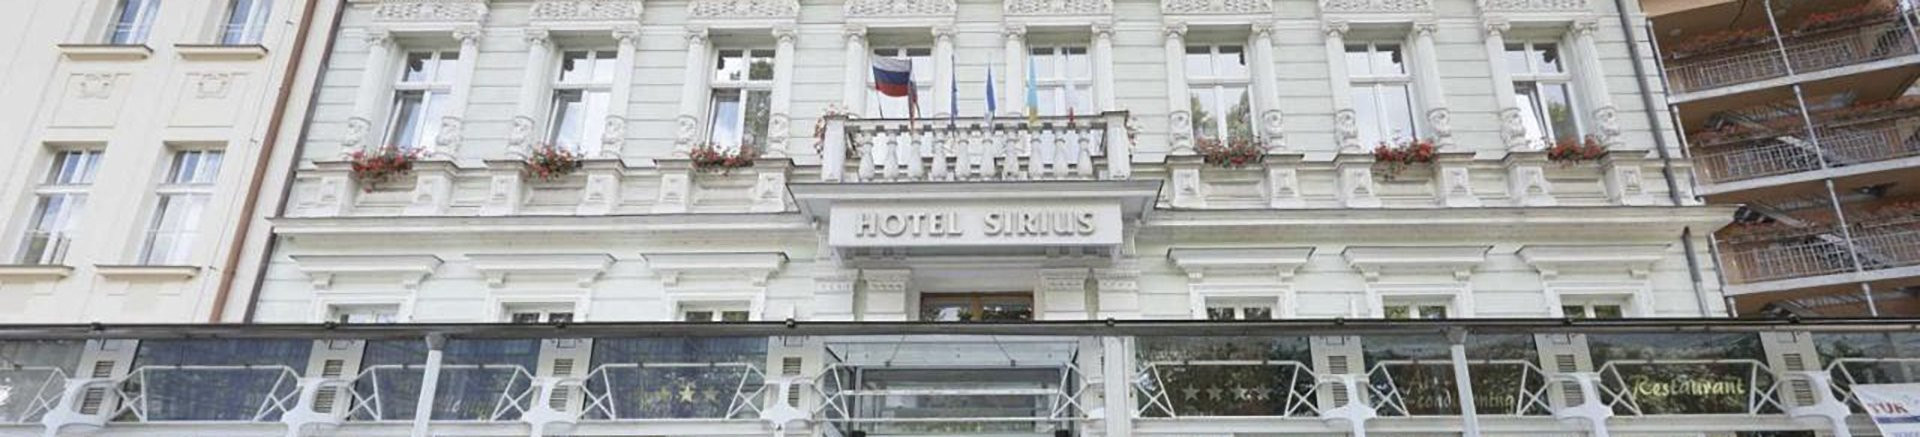 Karlovy Vary - Park Hotel Sirius banner picture